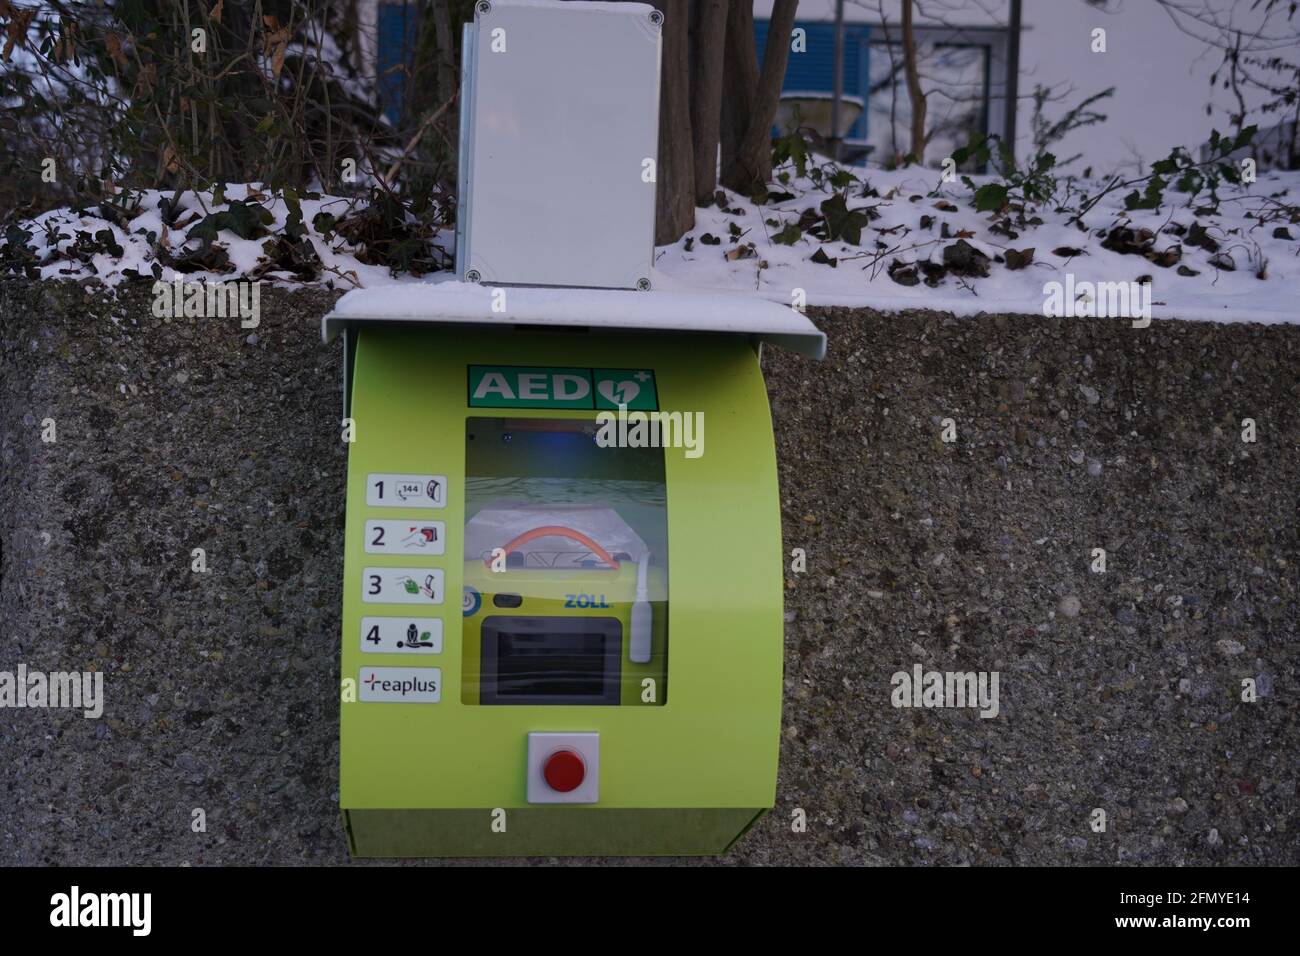 Automated external defibrillator installed on a public place, in the street. Stock Photo